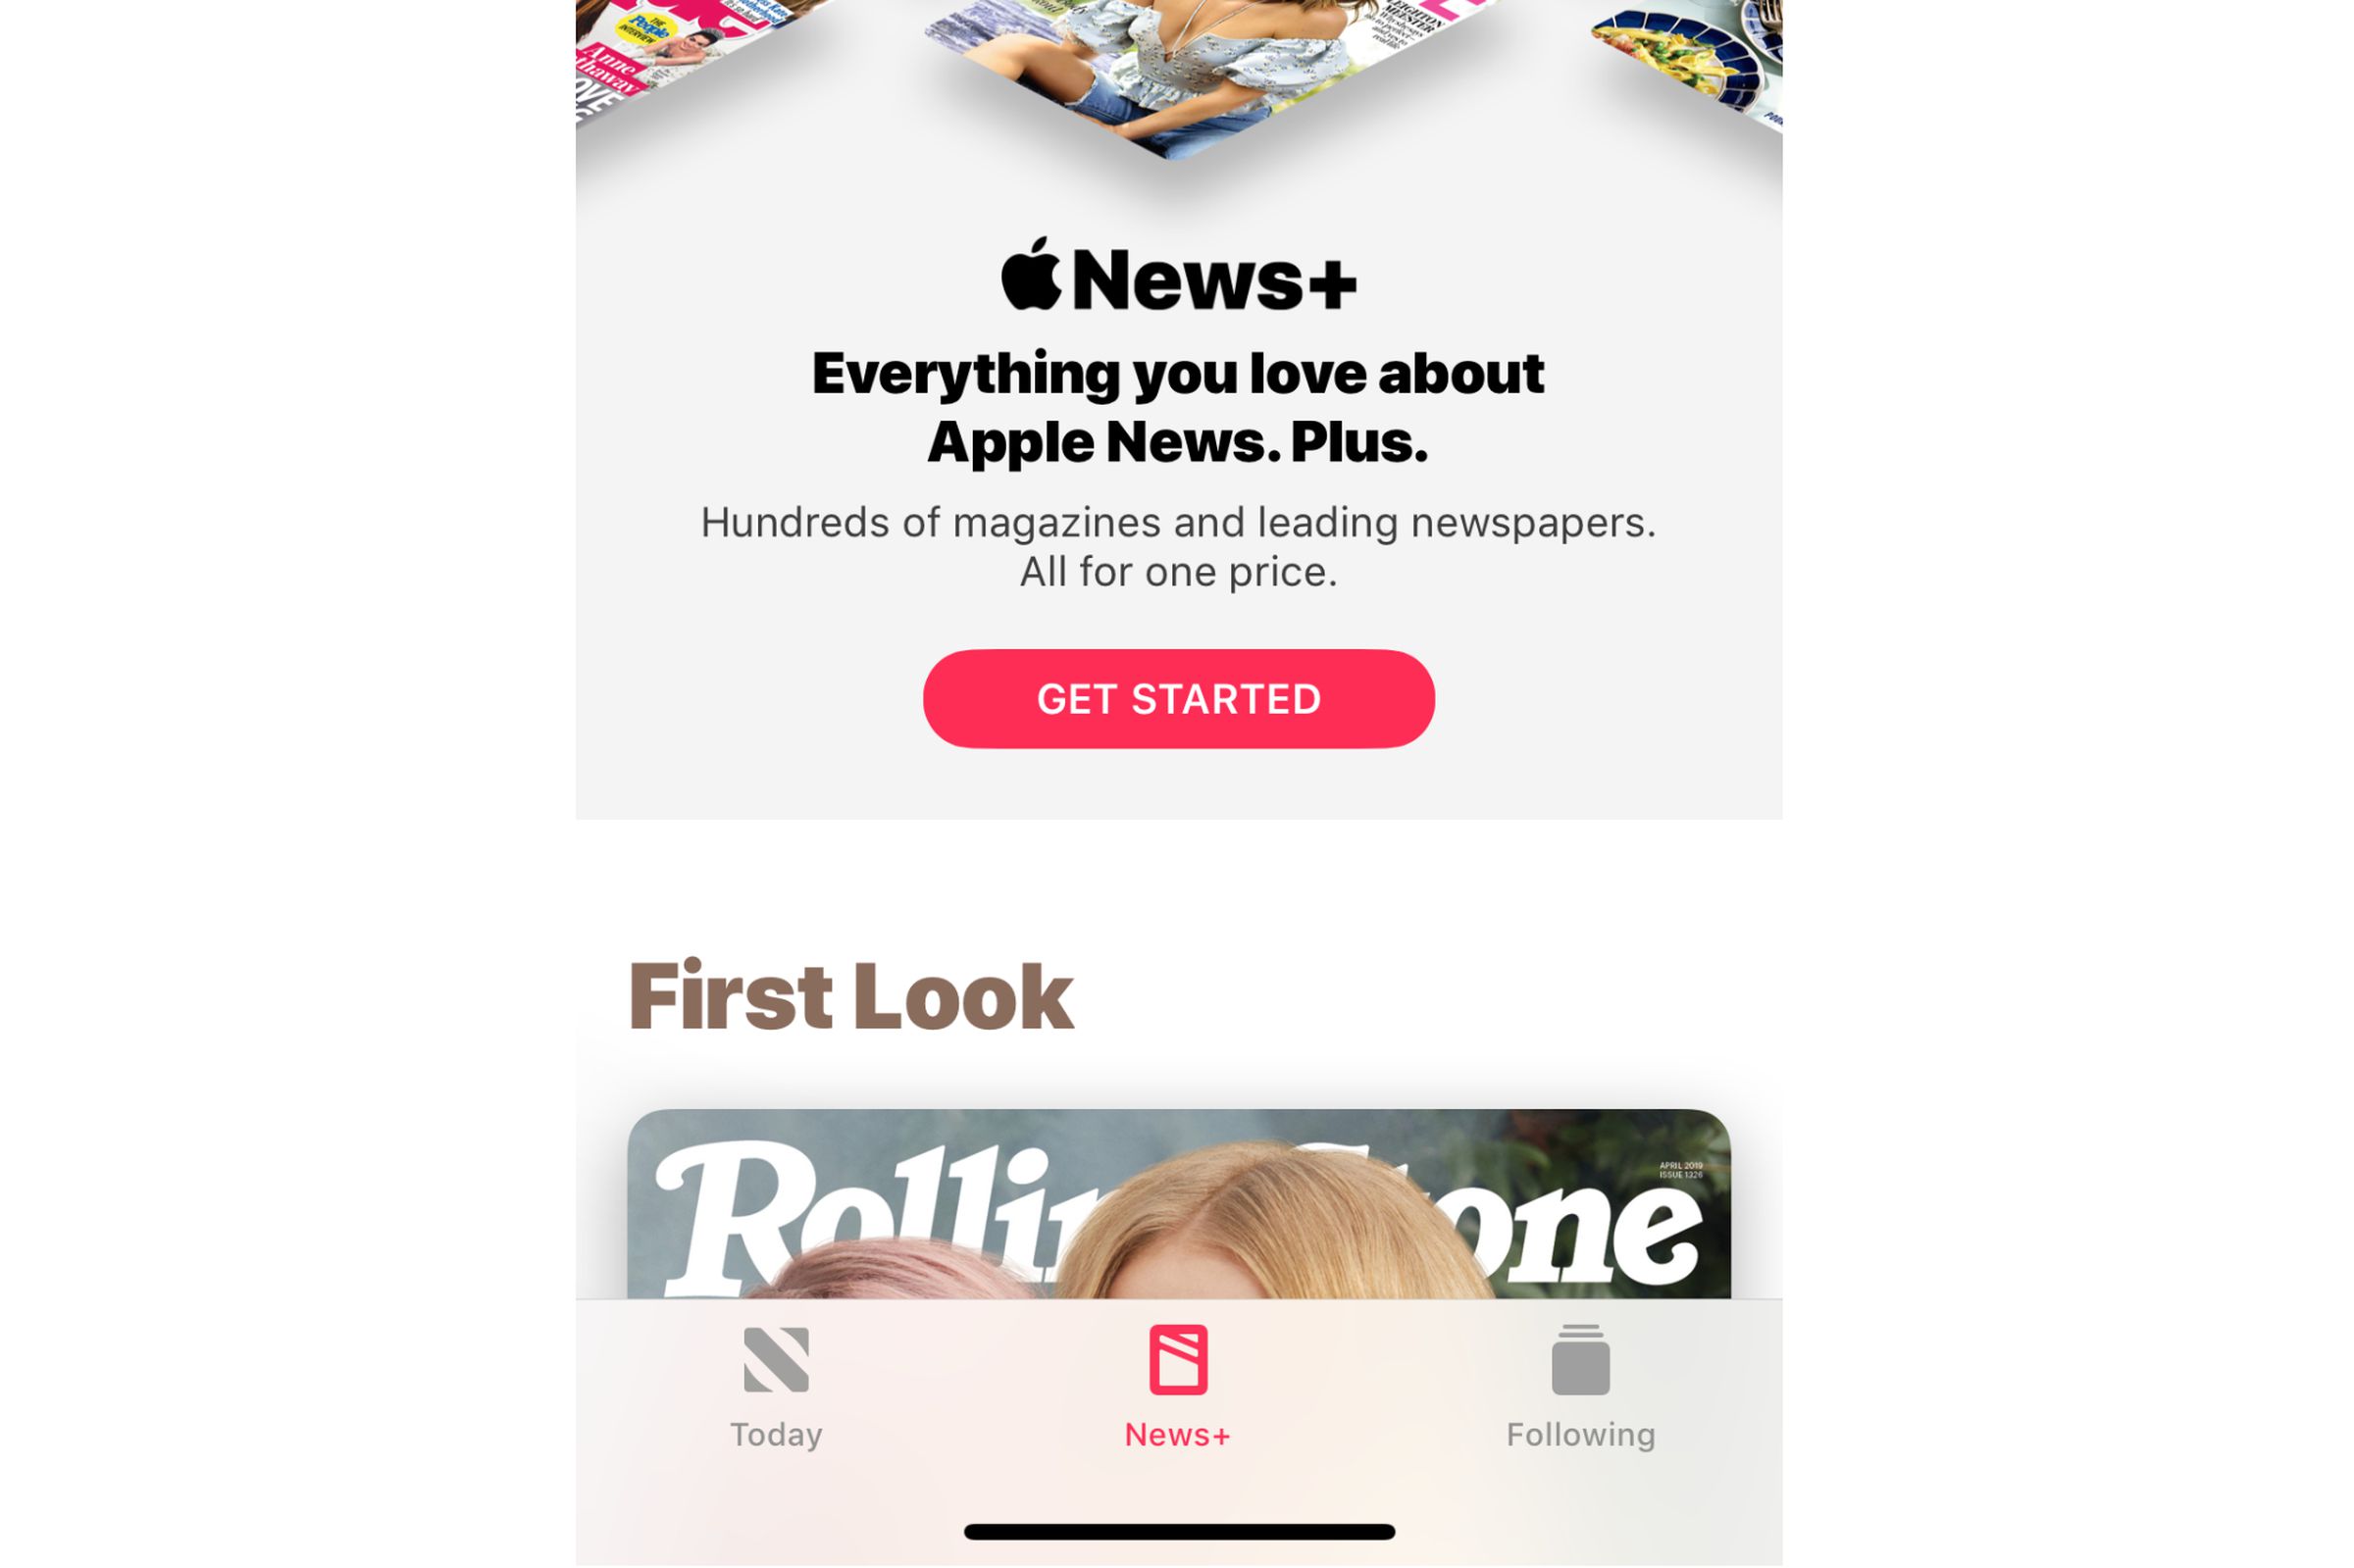 The News+ section on the bottom of the iPhone app